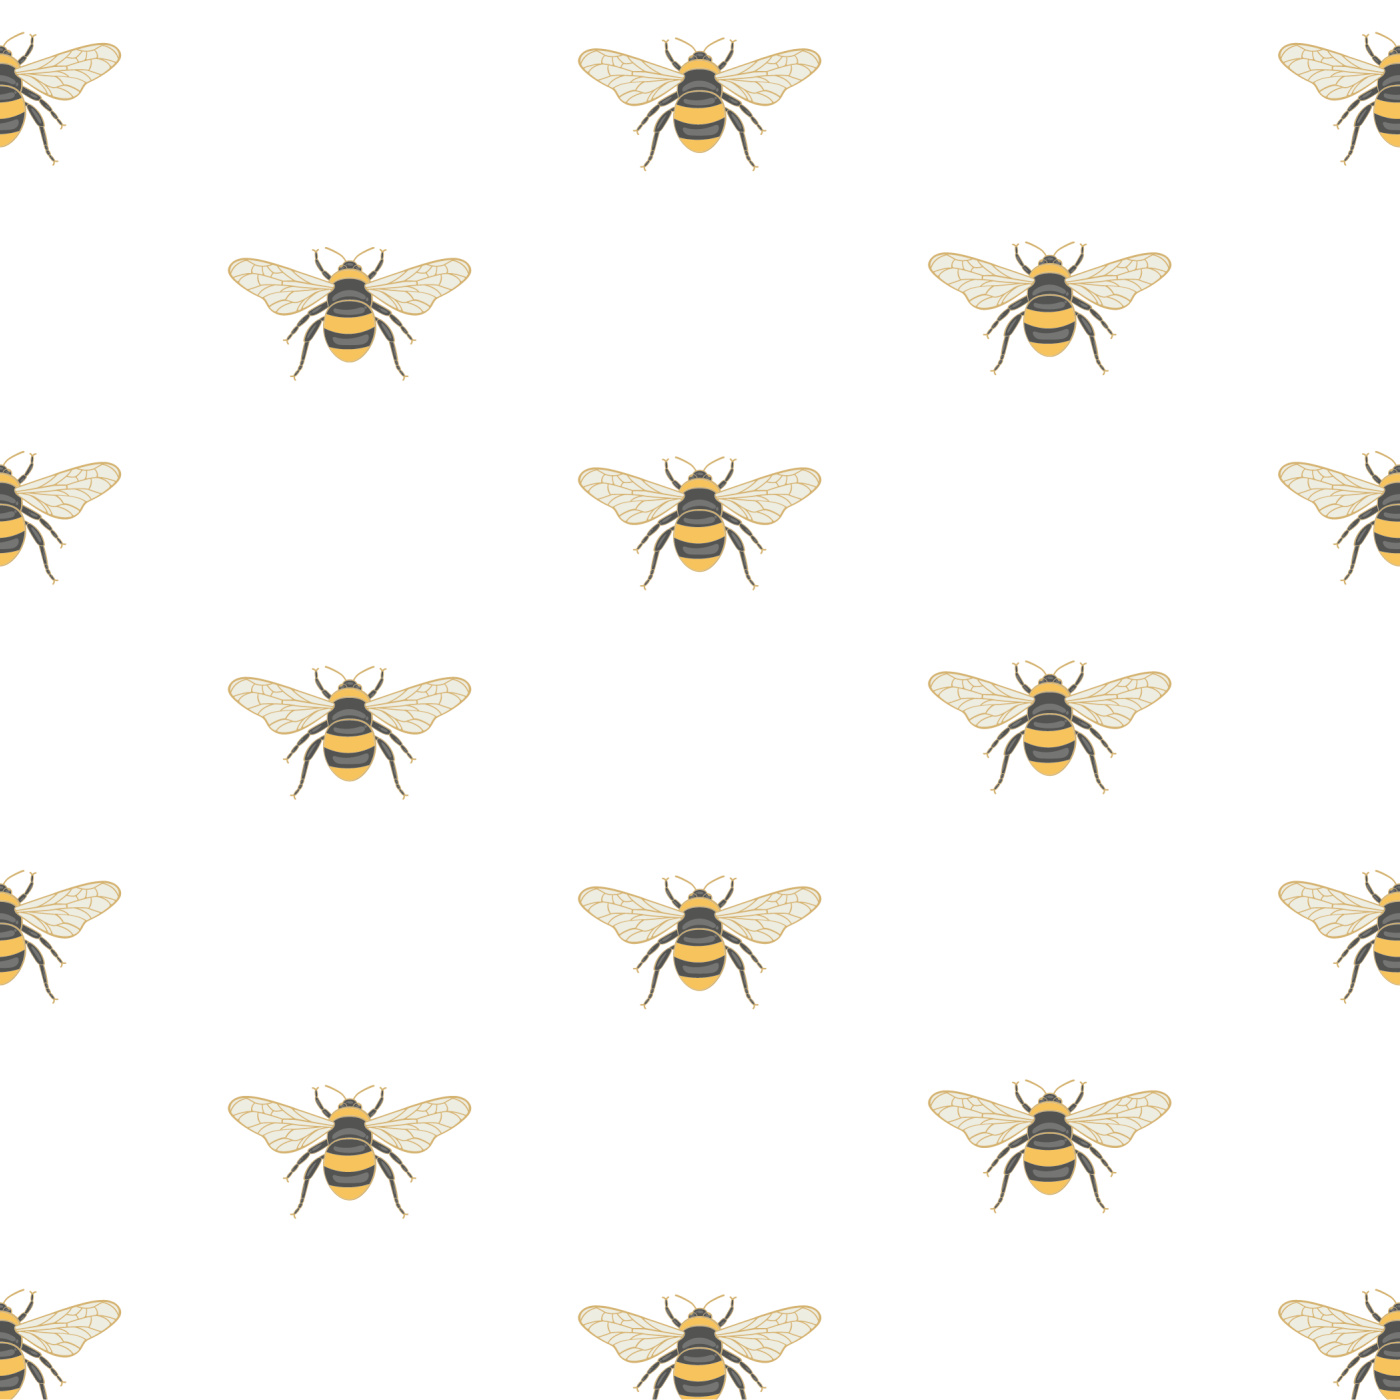 Free Cute Childlike Bees Mobile Wallpaper to customize